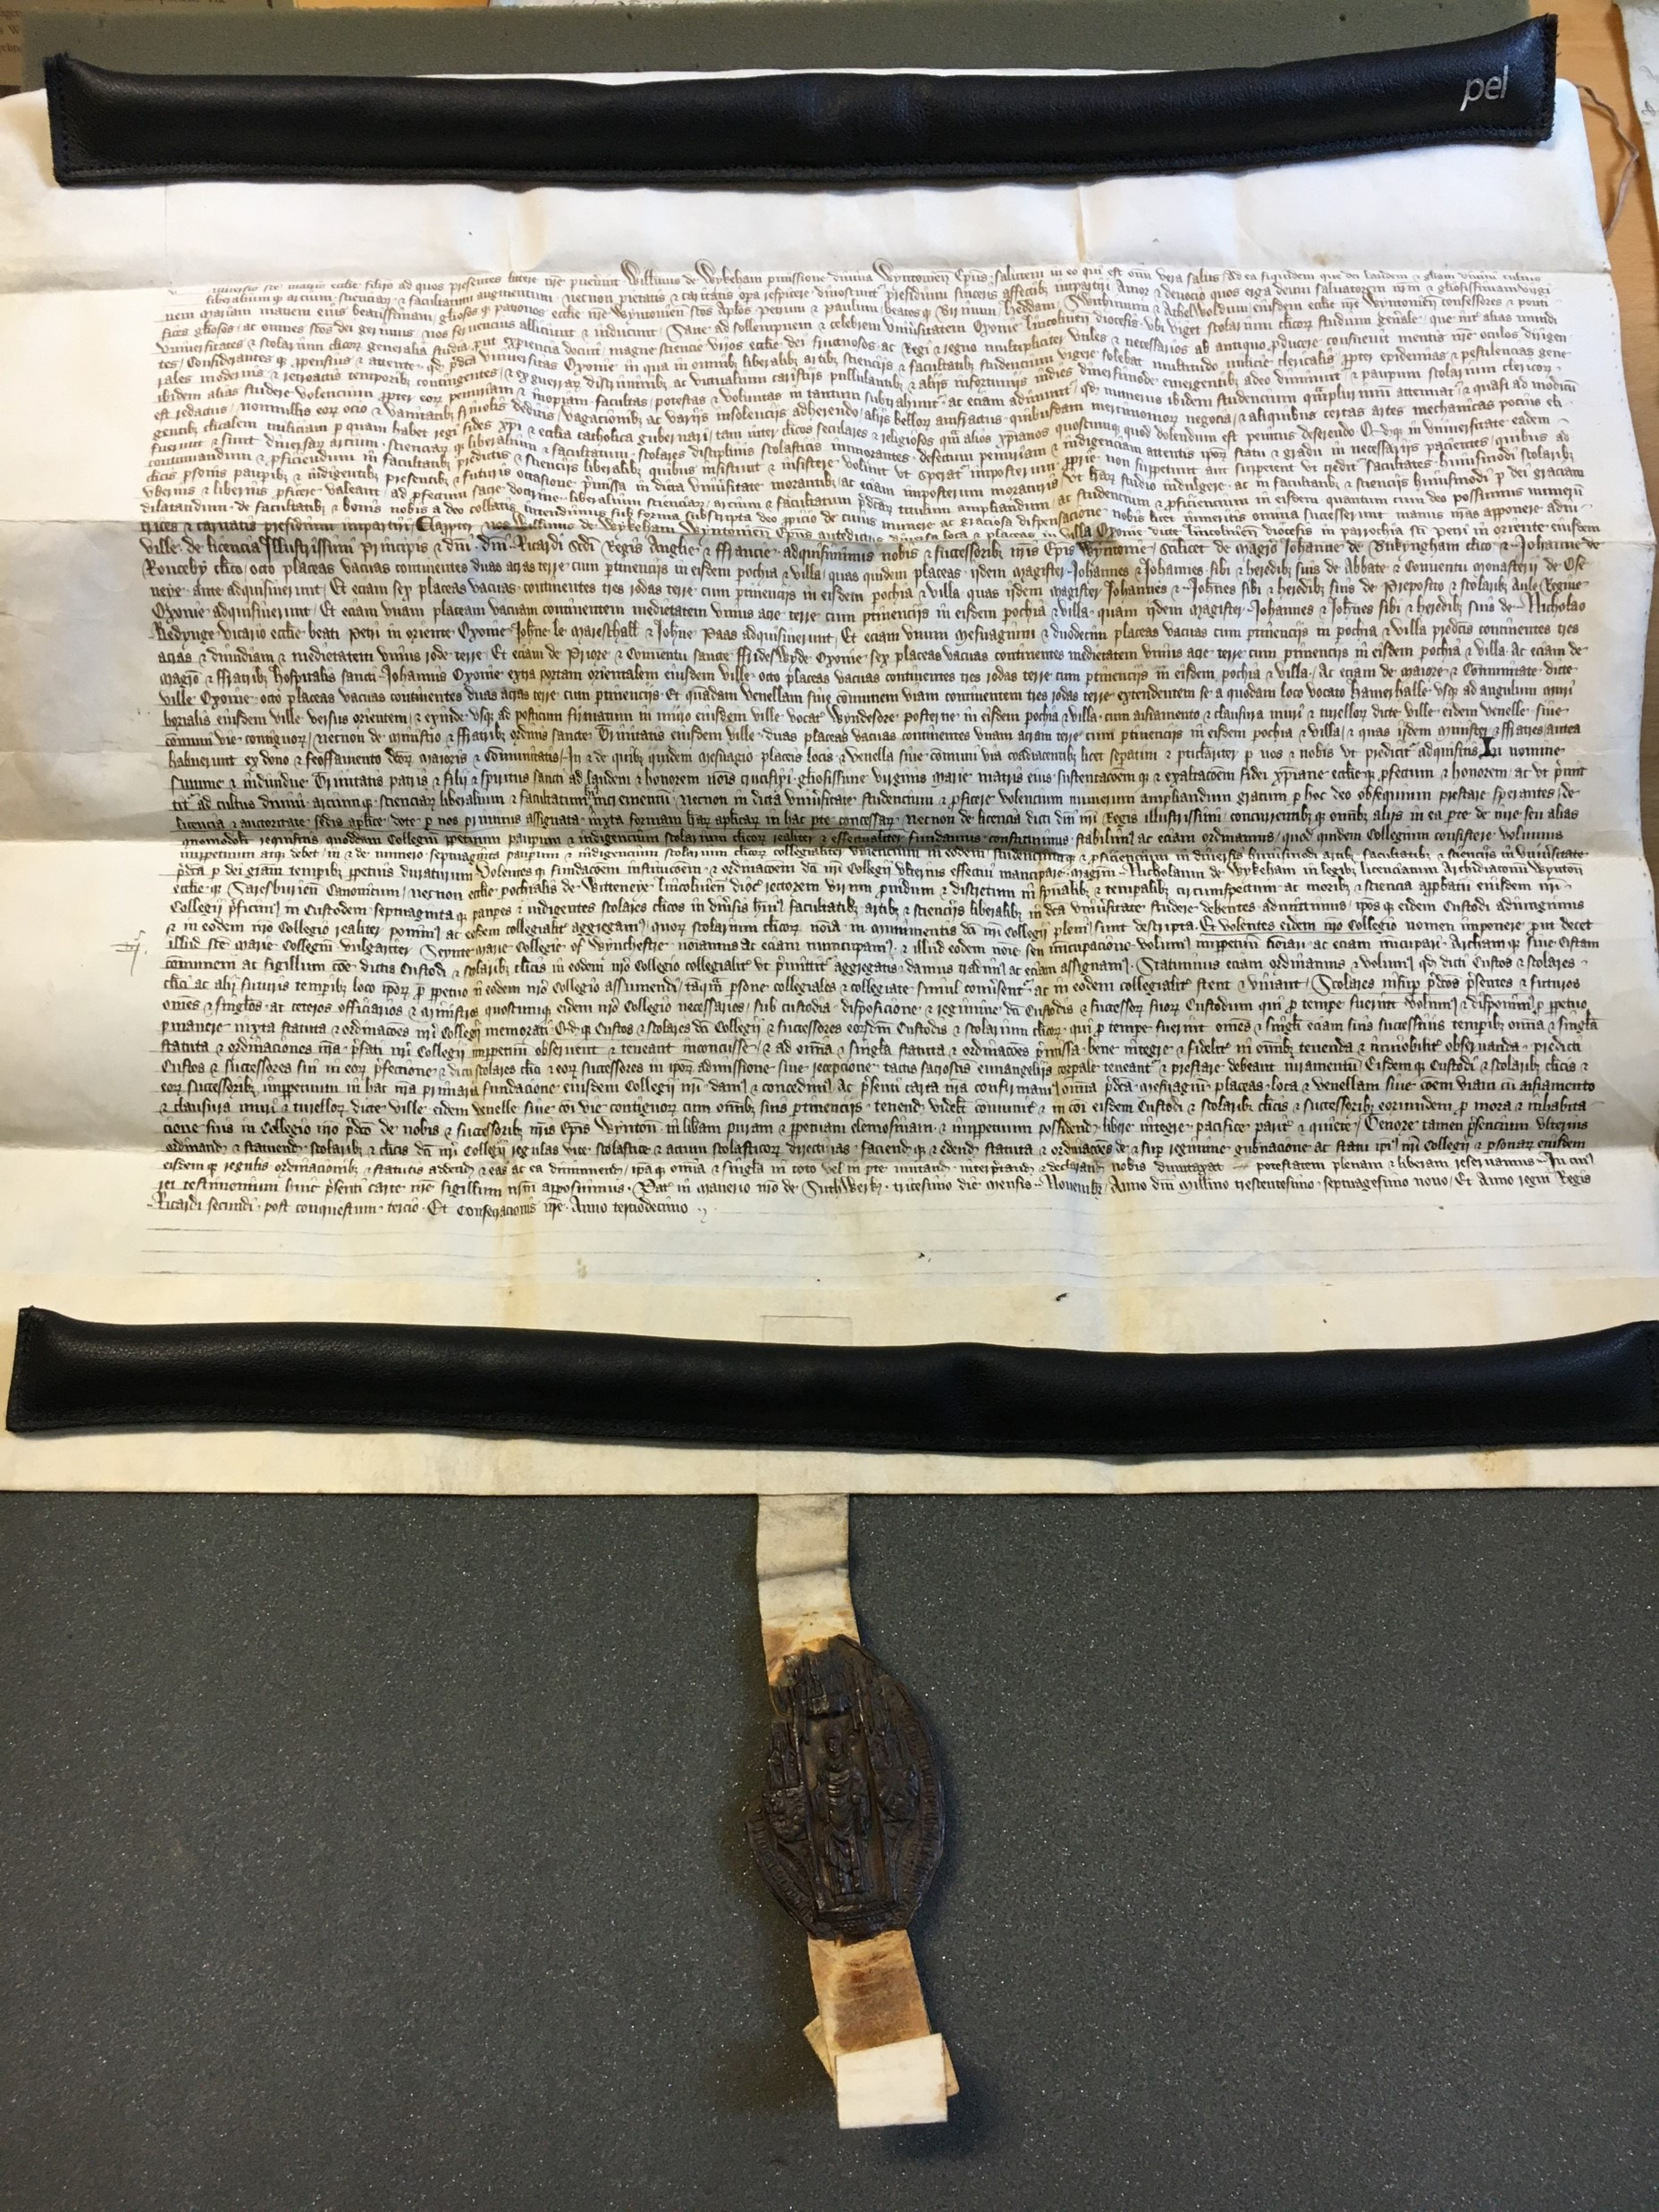 The Founder's Charter with wax seal